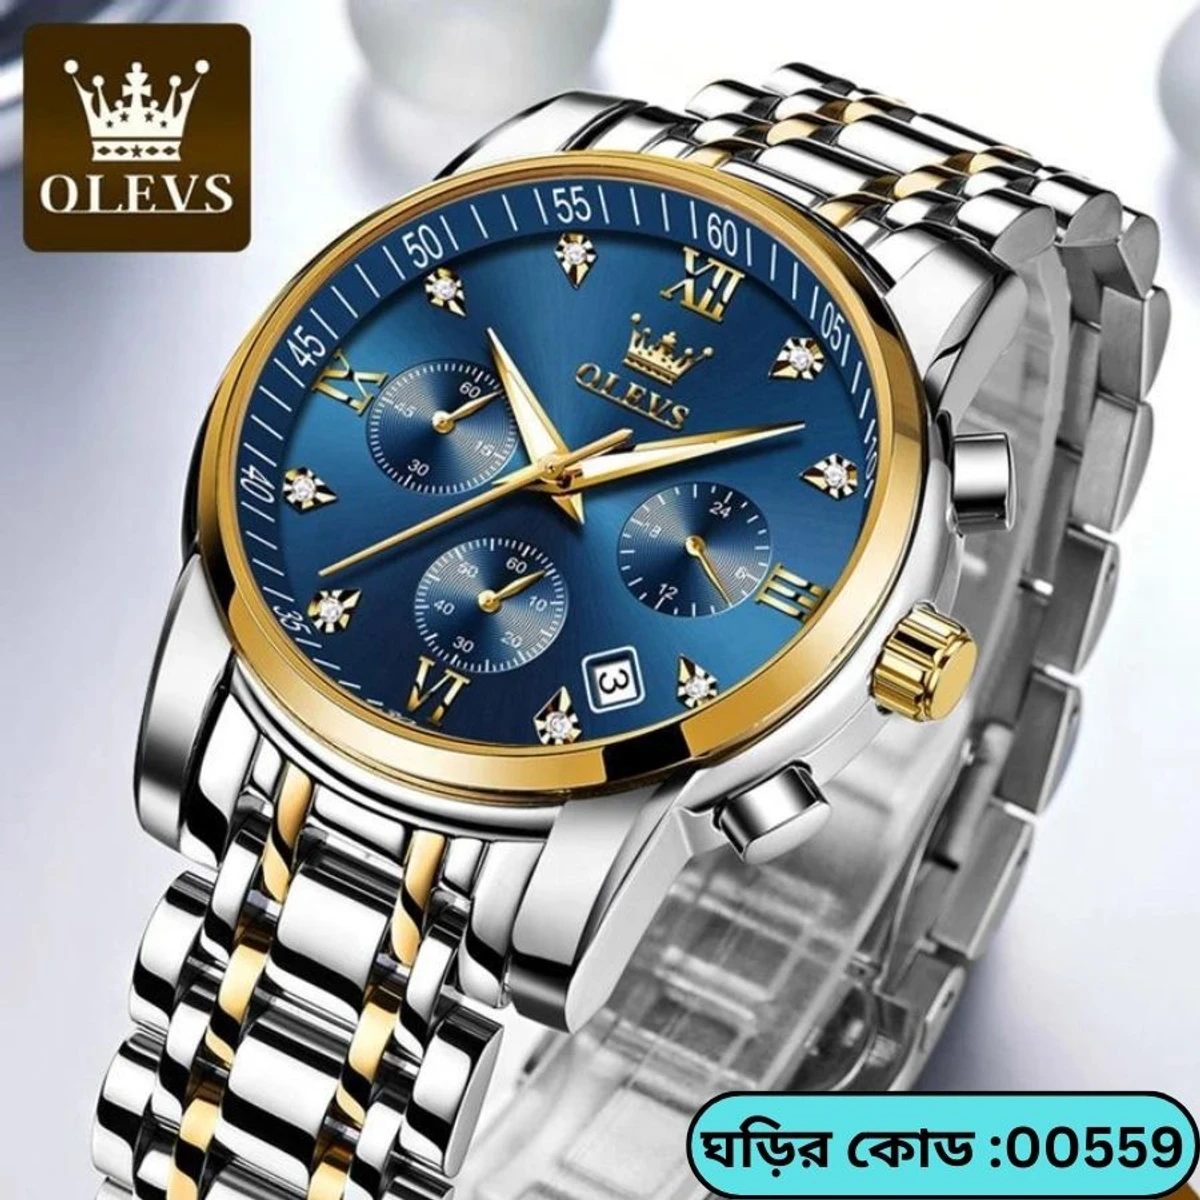 OLEVS MODEL 2858 Watch for Men Stainless Steel Watches - 2858 TOTON AR DIAL BLUE  ROUND GOLDEN - MAN WATCH